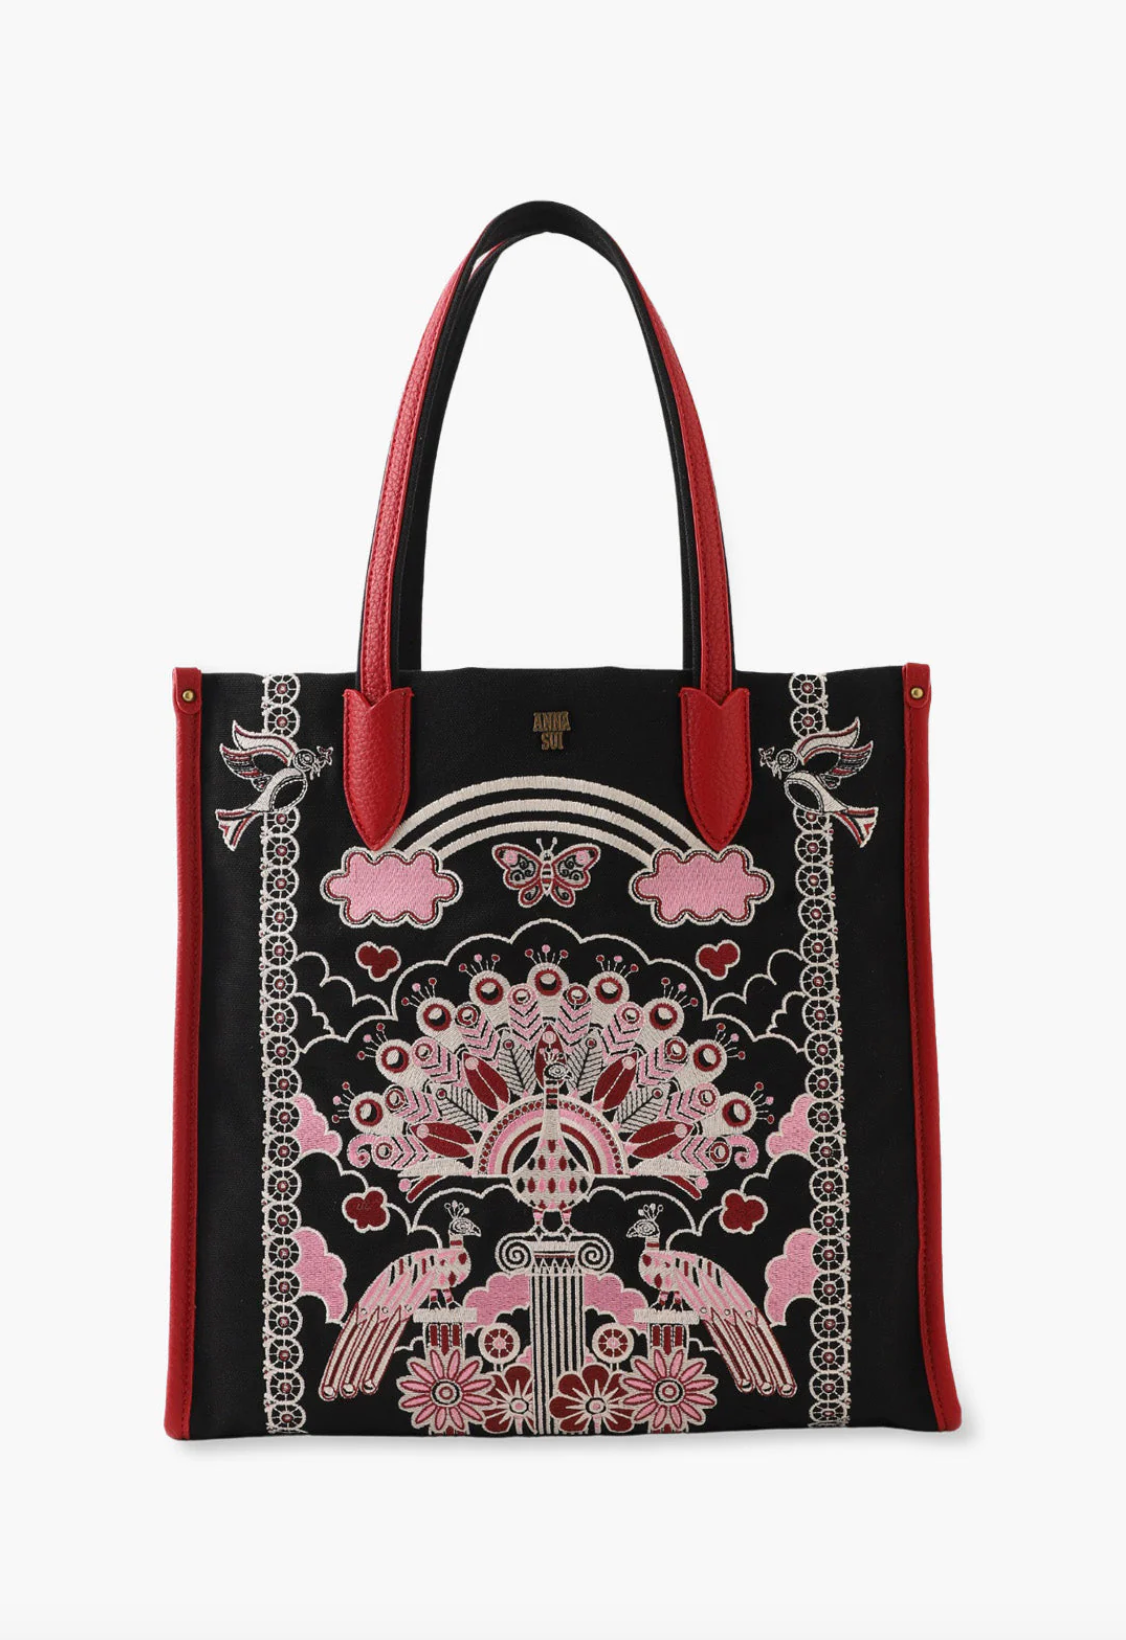 Black Tote, peacock at the center of print, fantastical creatures in a pink and red colorway around